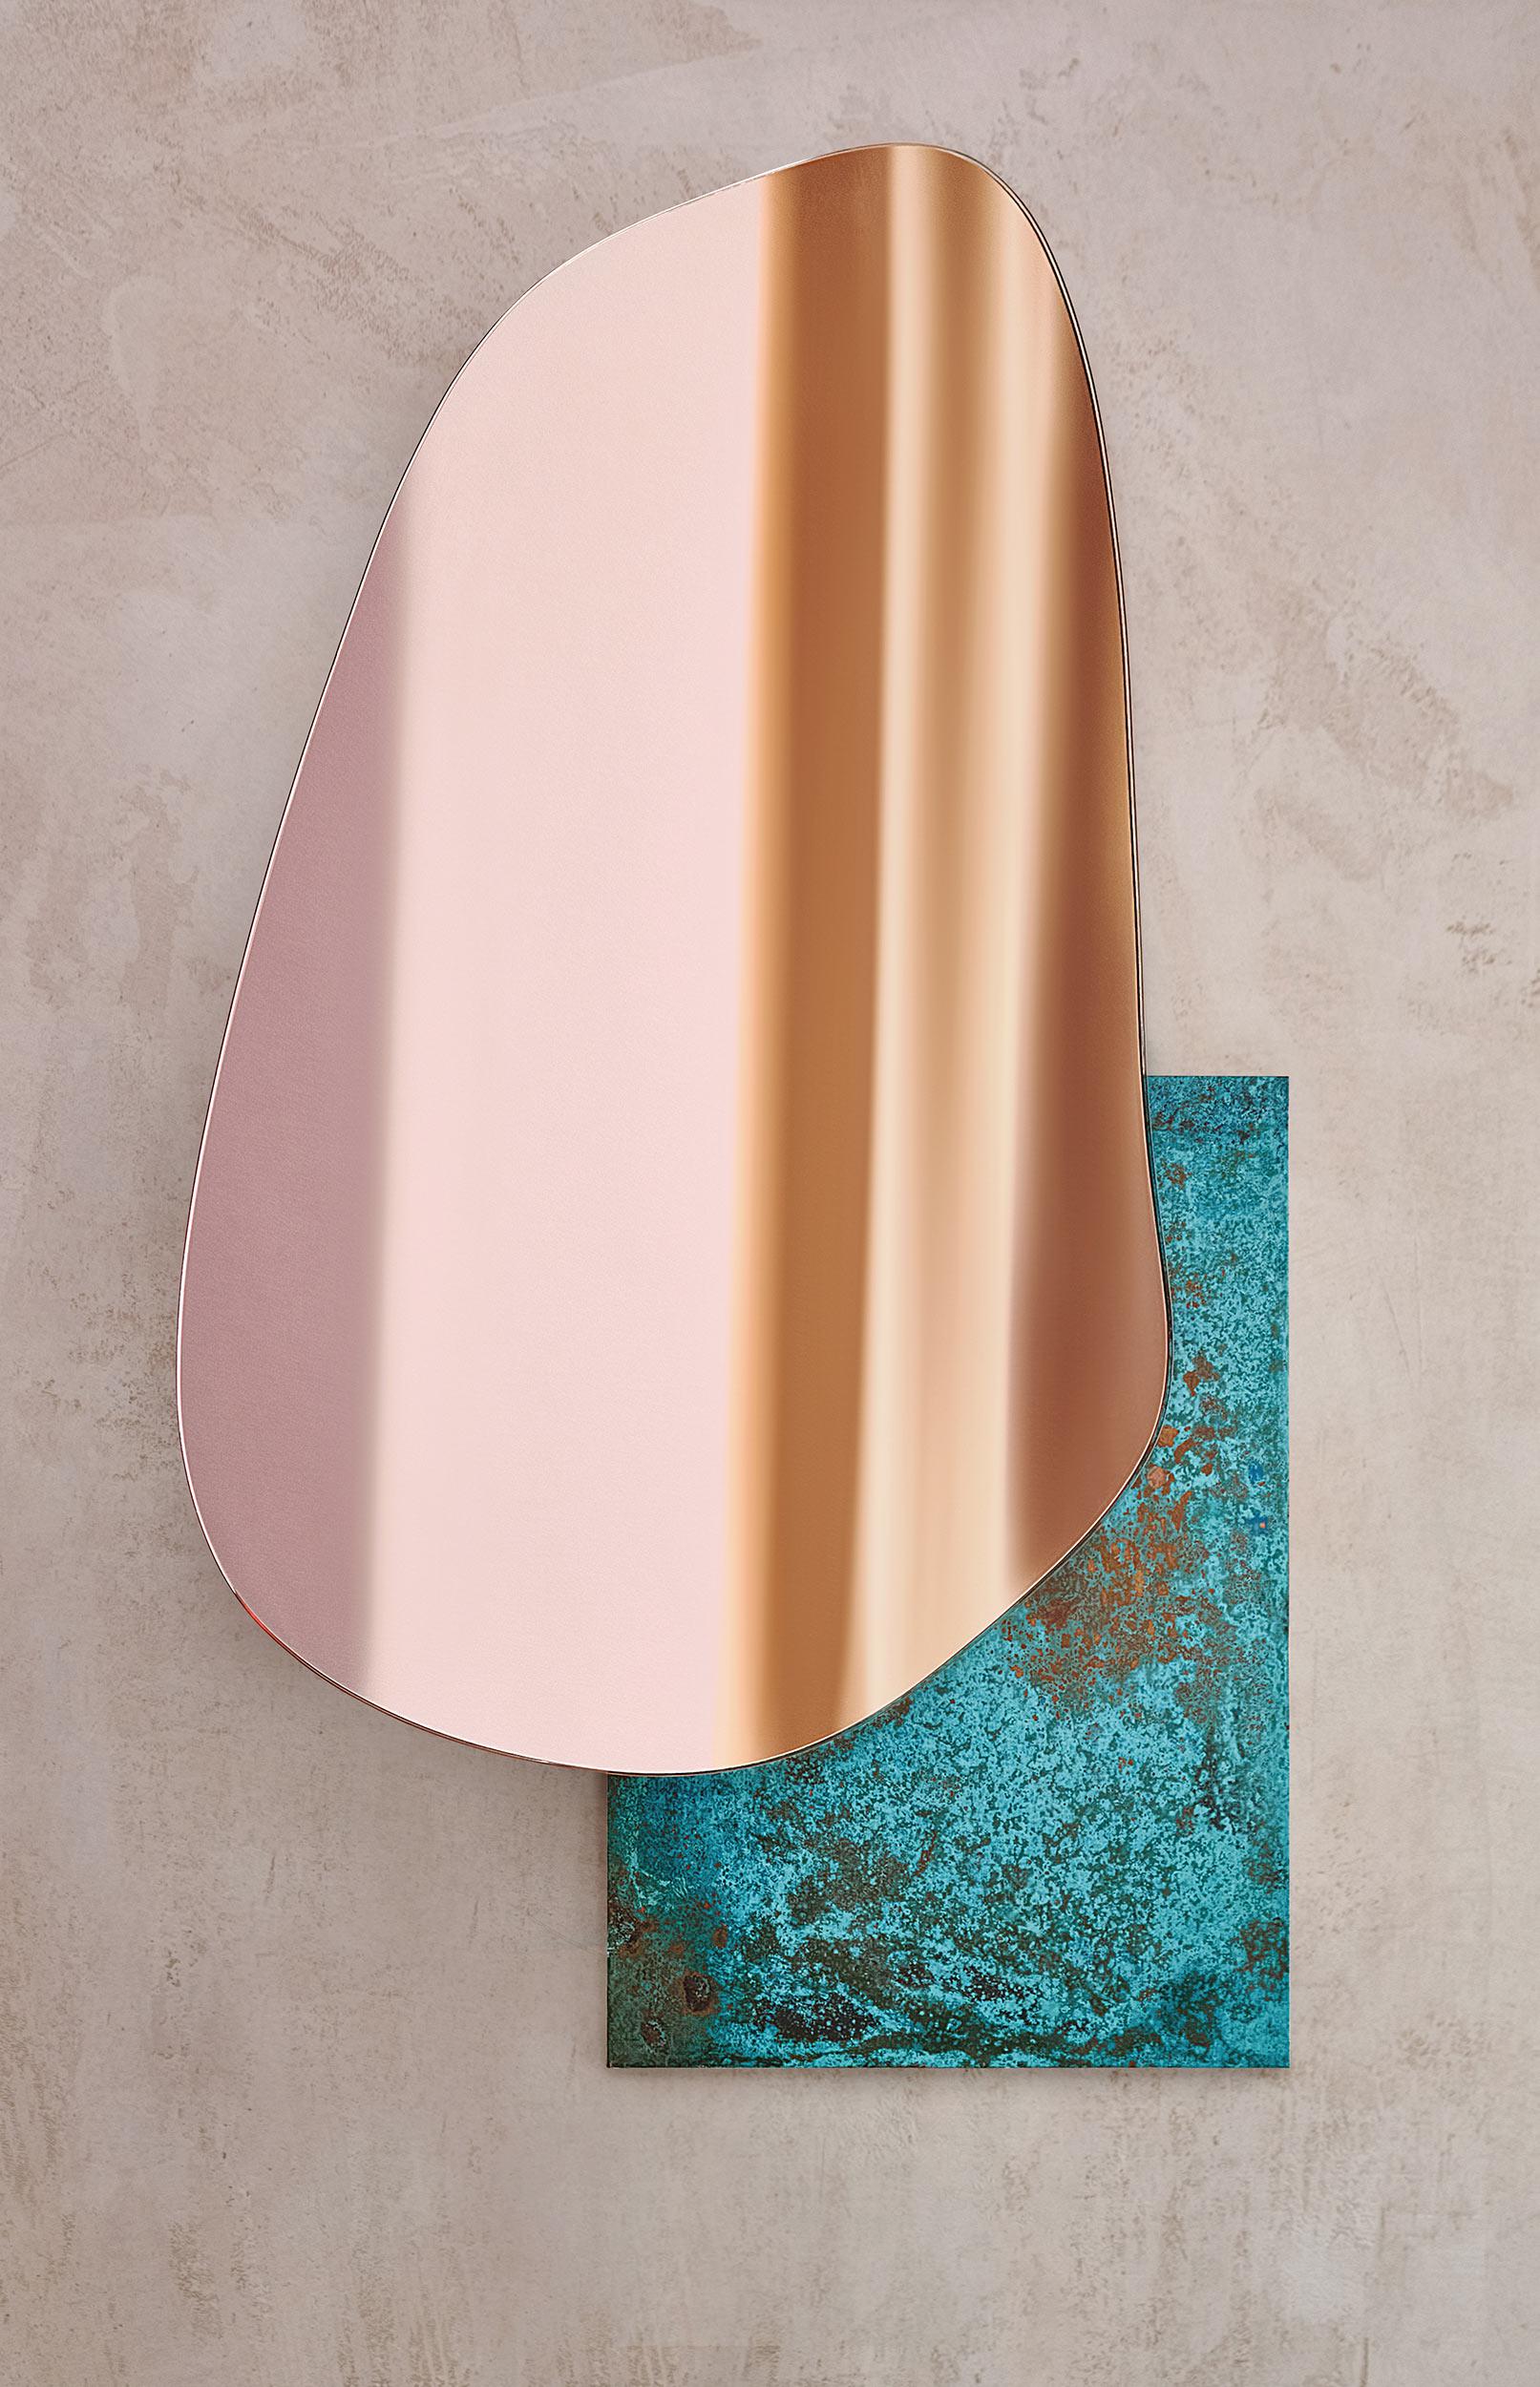 Organic Modern Contemporary Wall Mirror 'Lake 3' by Noom, Burned Steel + Copper Tint Mirror For Sale